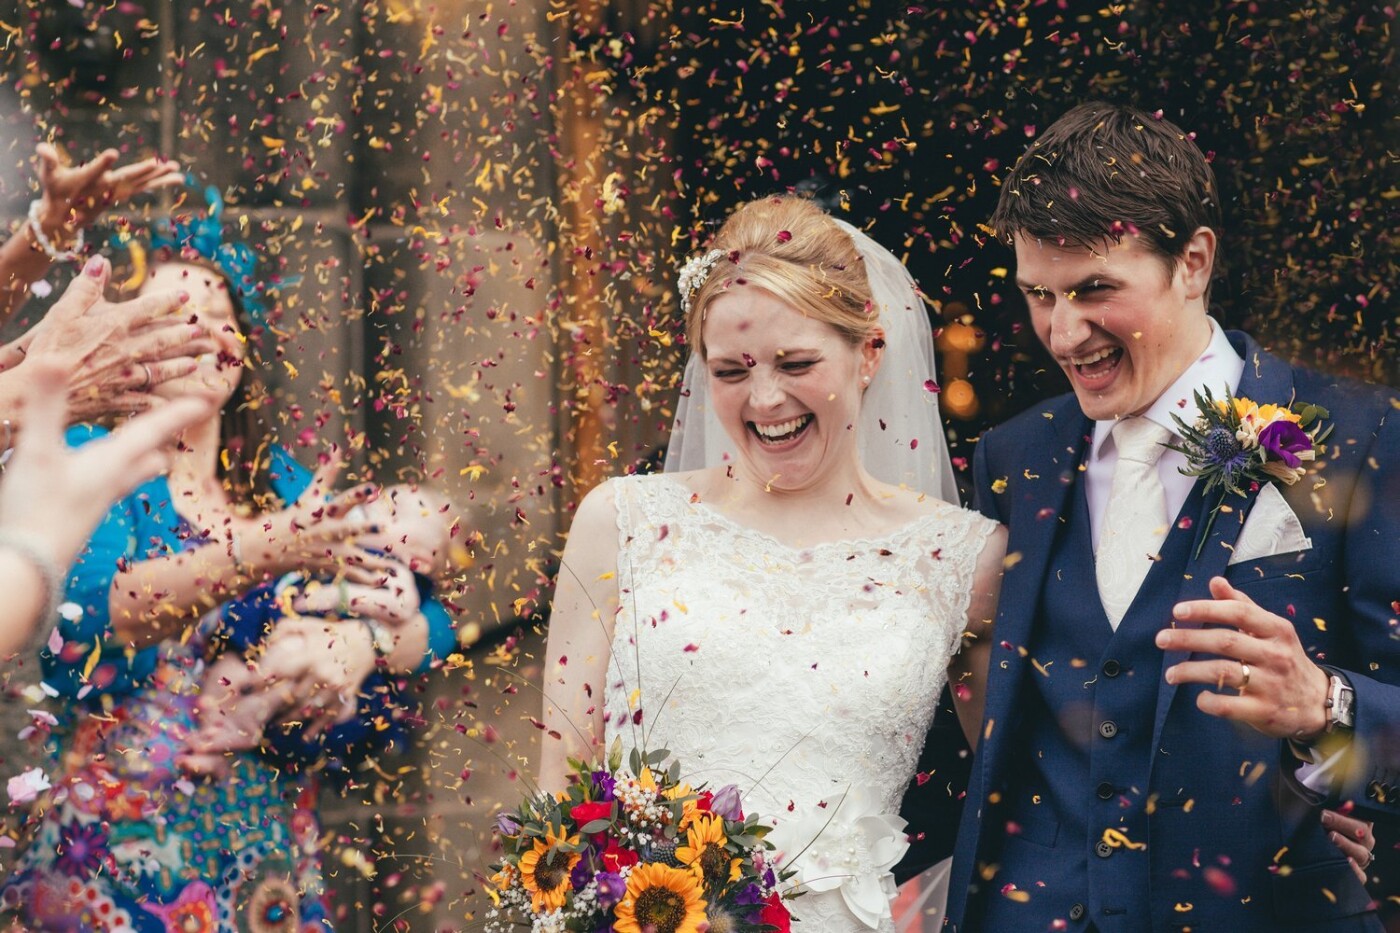 The expected, yet unexpected attack of the confetti. Rachel and Joe provided all their guests with this gorgeous real petal confetti, offered to all the guests by their beautiful flower girls. As the newlyweds left the church they were totally smothered in the colourful spray, this very moment really was as exciting as it looks.